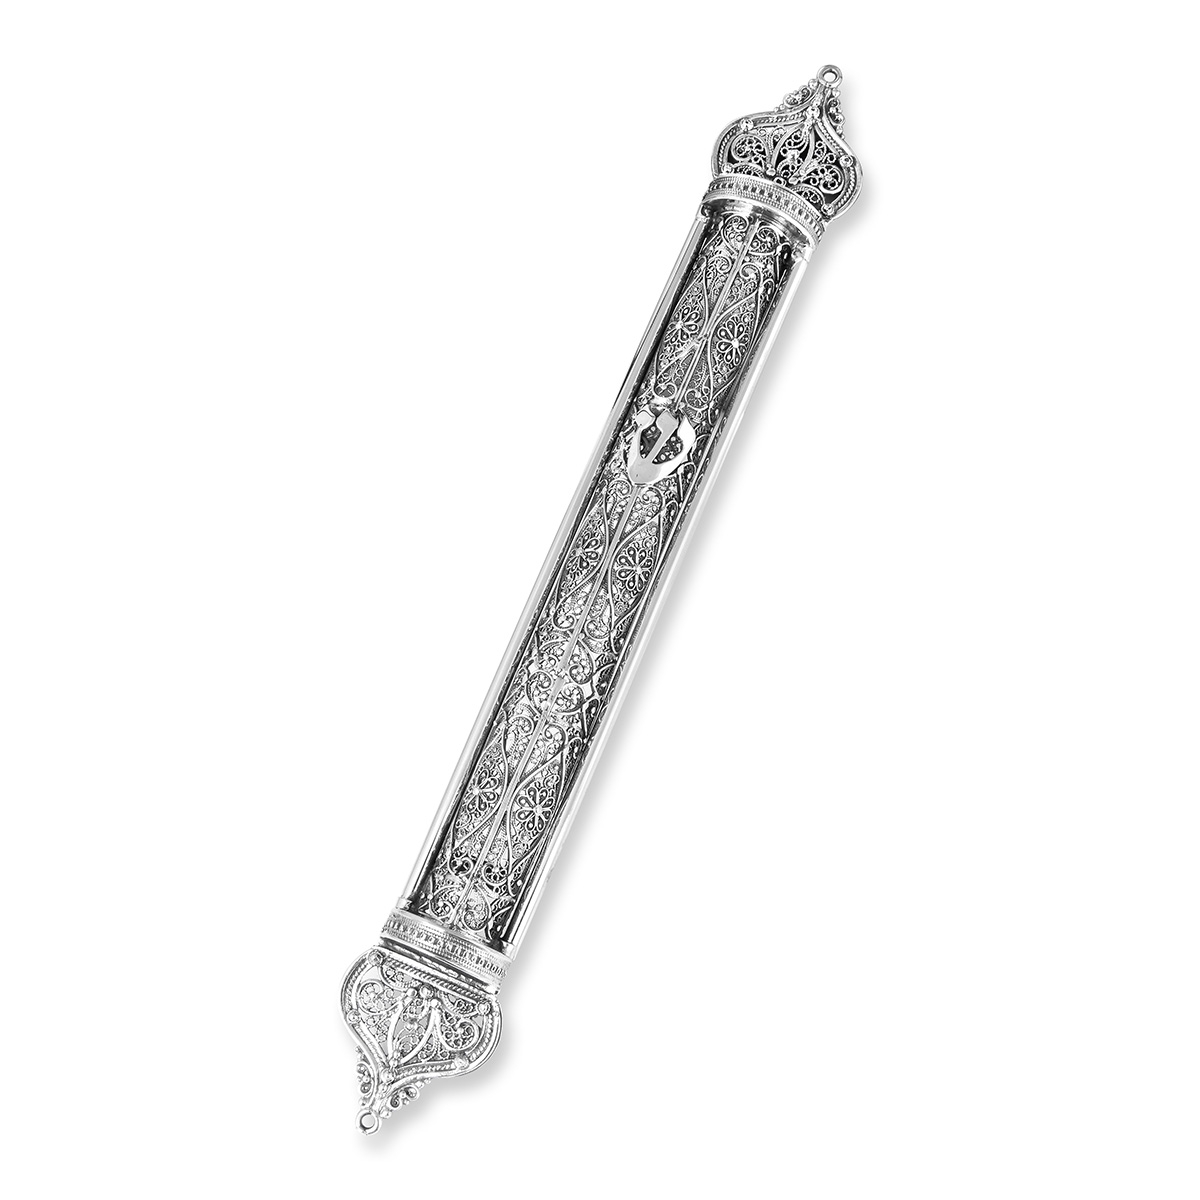 Traditional Yemenite Art Handcrafted Sterling Silver Mezuzah Case With Refined Design - 1